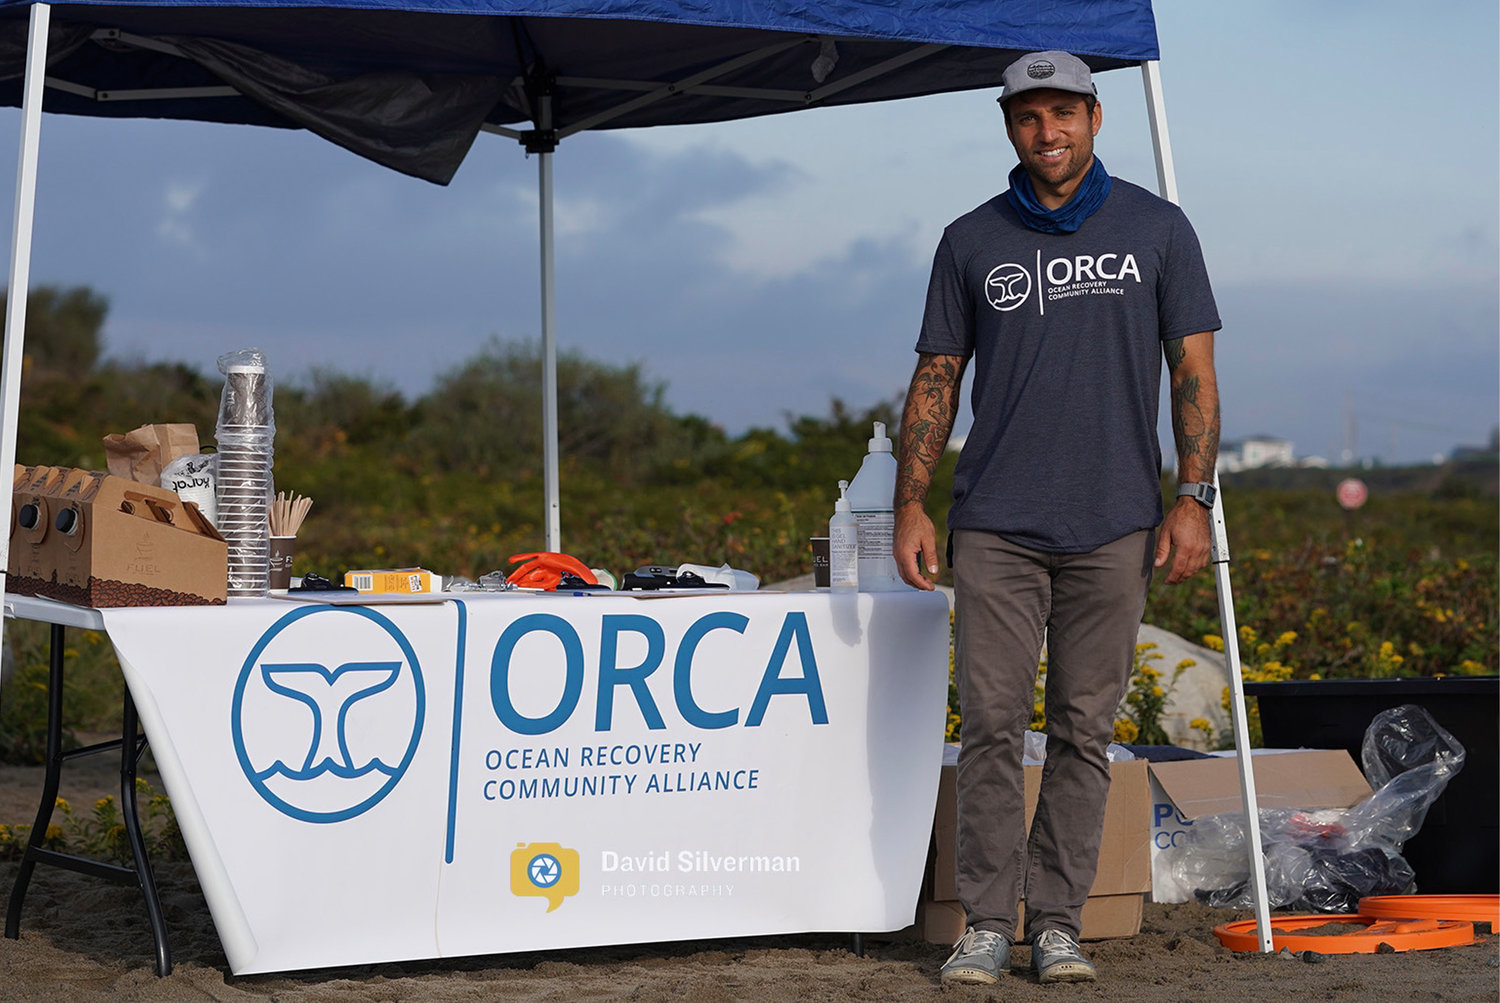 As a surfer, Kevin Carmignani has special ties to the ocean and serves as project coordinator for ORCA